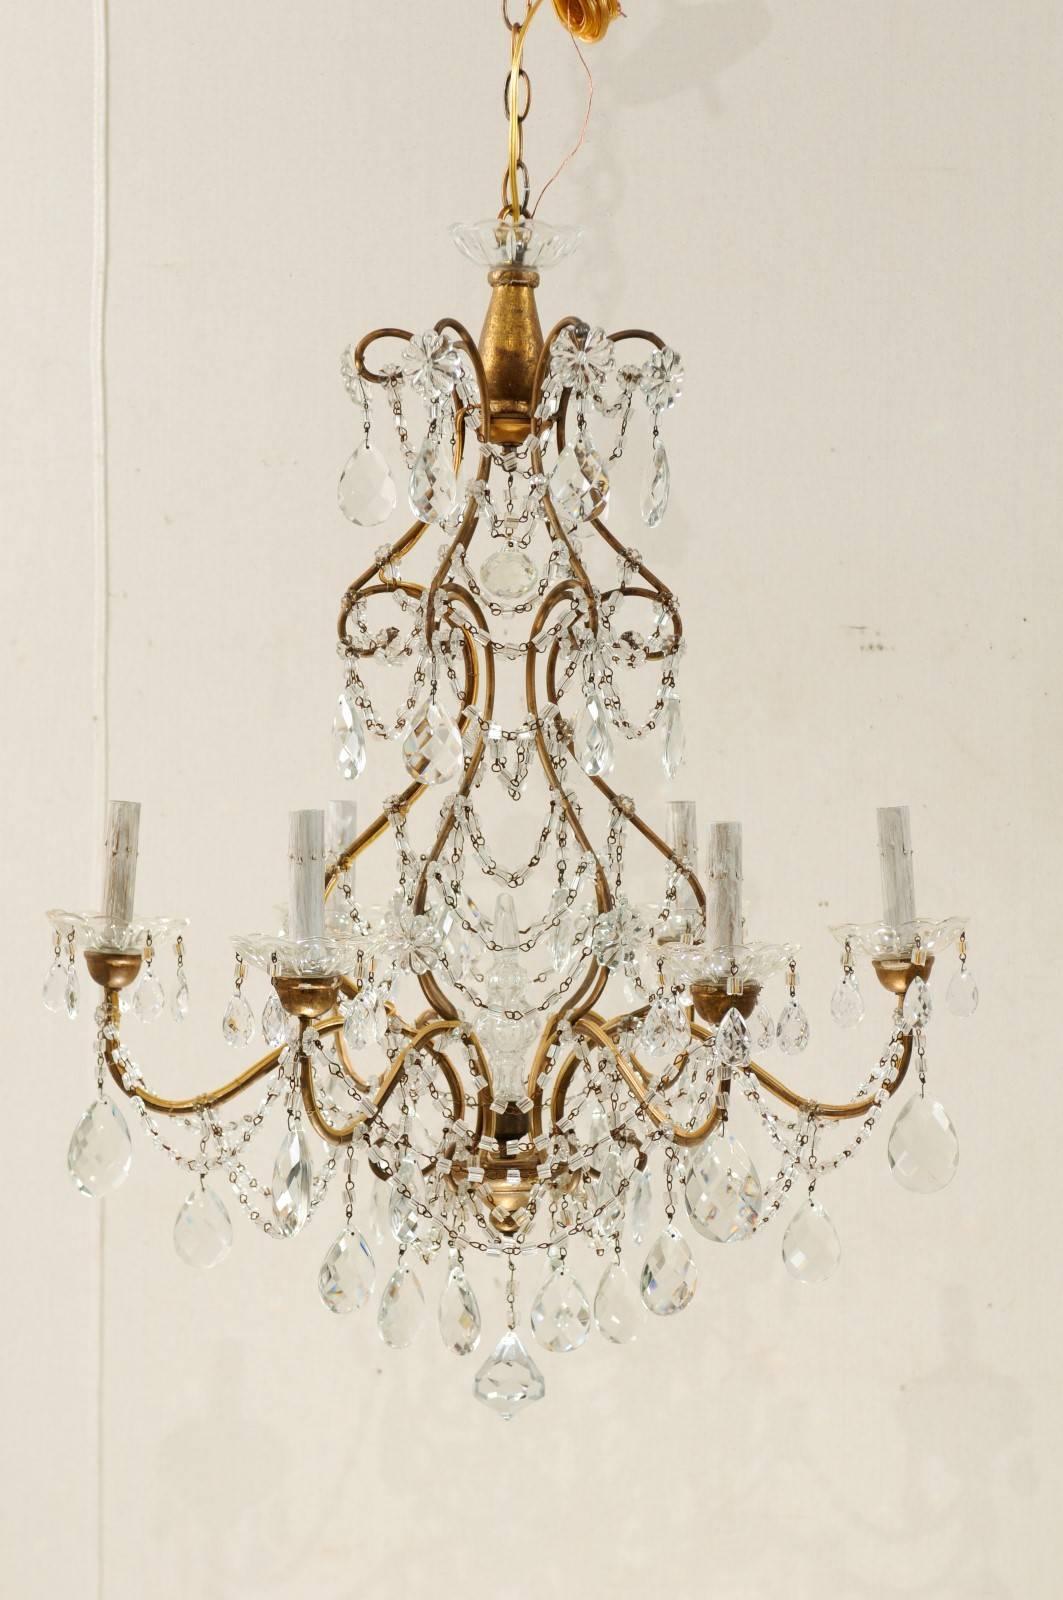 Beaded Pair of Italian Mid-Century Crystal Chandeliers with Six-Lights Each, Gold Hue